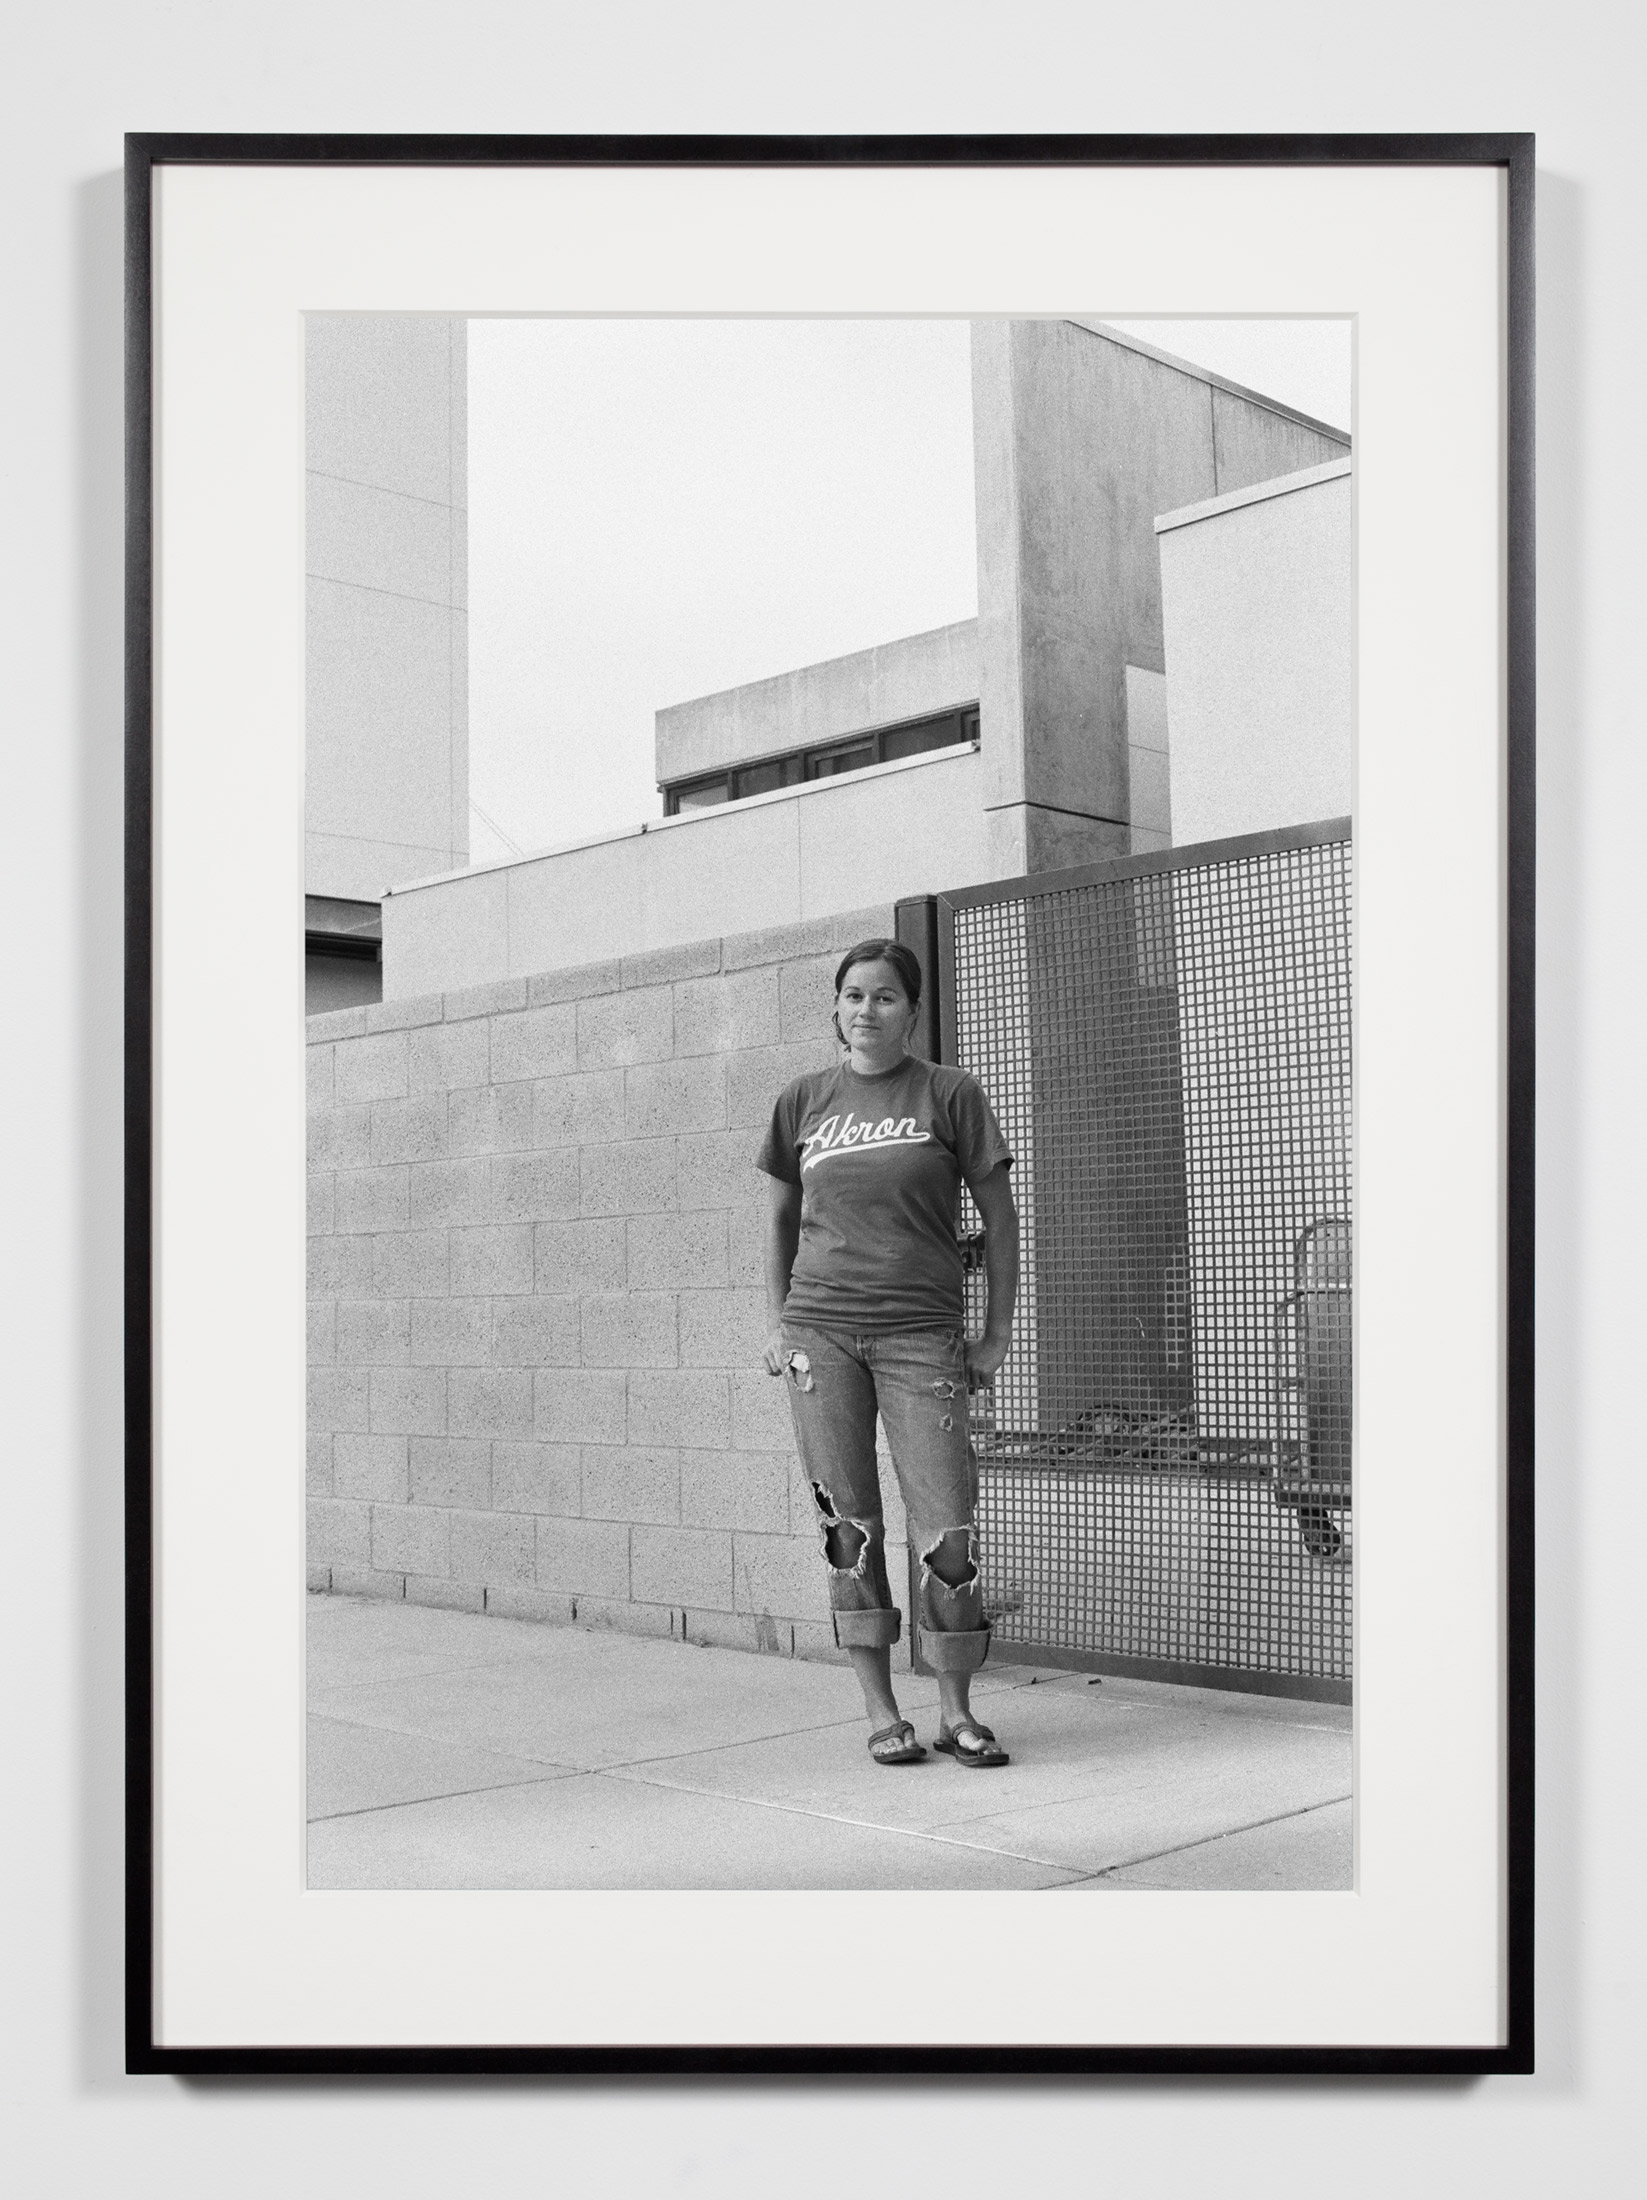   Darkroom Assistant, Irvine, California, September 14, 2009   2011  Epson Ultrachrome K3 archival ink jet print on Hahnemühle Photo Rag paper  36 3/8 x 26 3/8 inches   Industrial Portraits, 2008–    A Diagram of Forces, 2011     